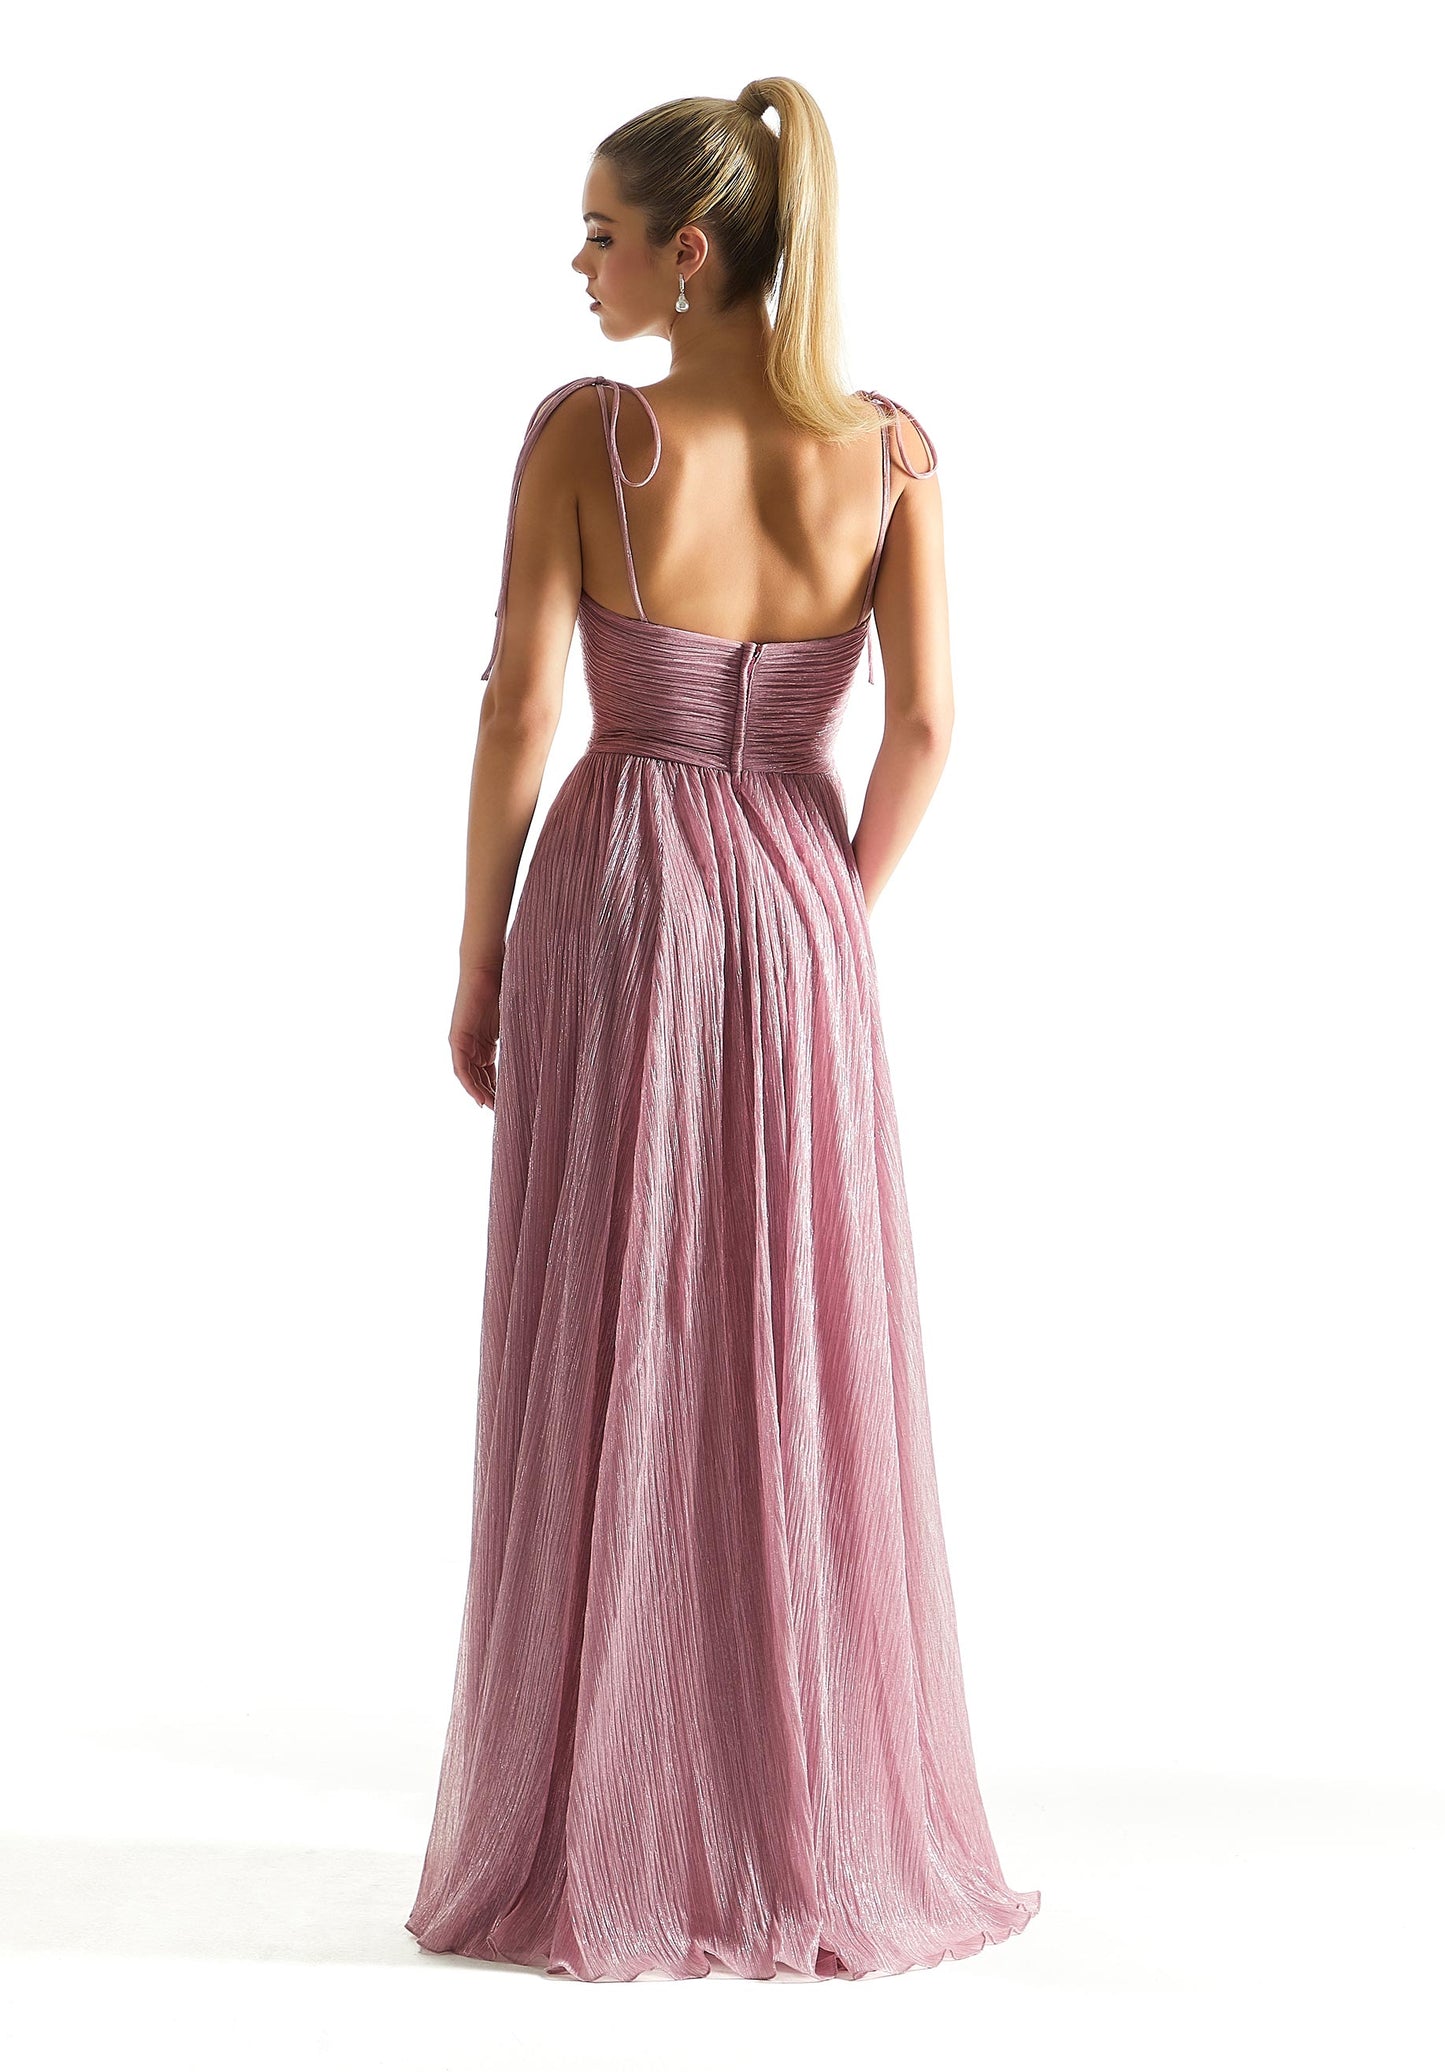 Pleated Shimmer Bridesmaid Dress with Tie Straps